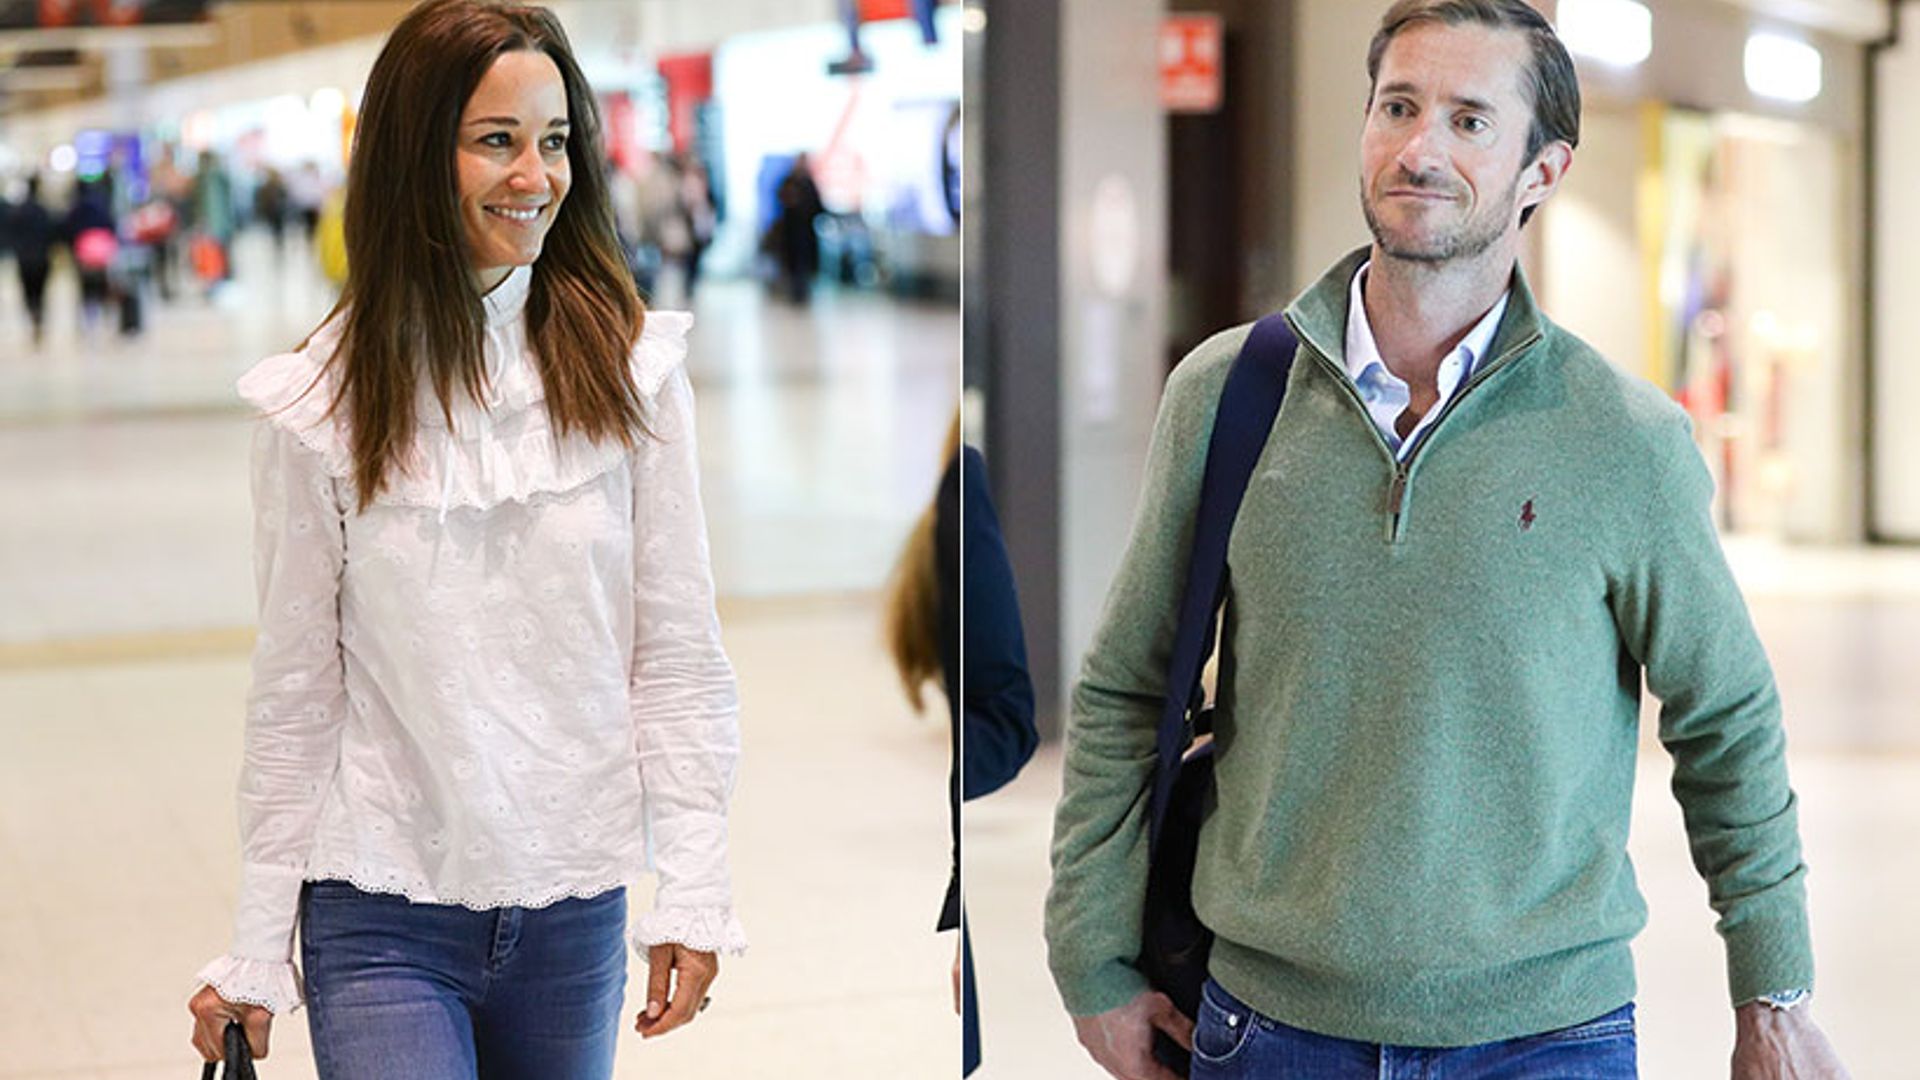 Newlyweds Pippa Middleton and James Matthews continue with their Australian adventure in Darwin